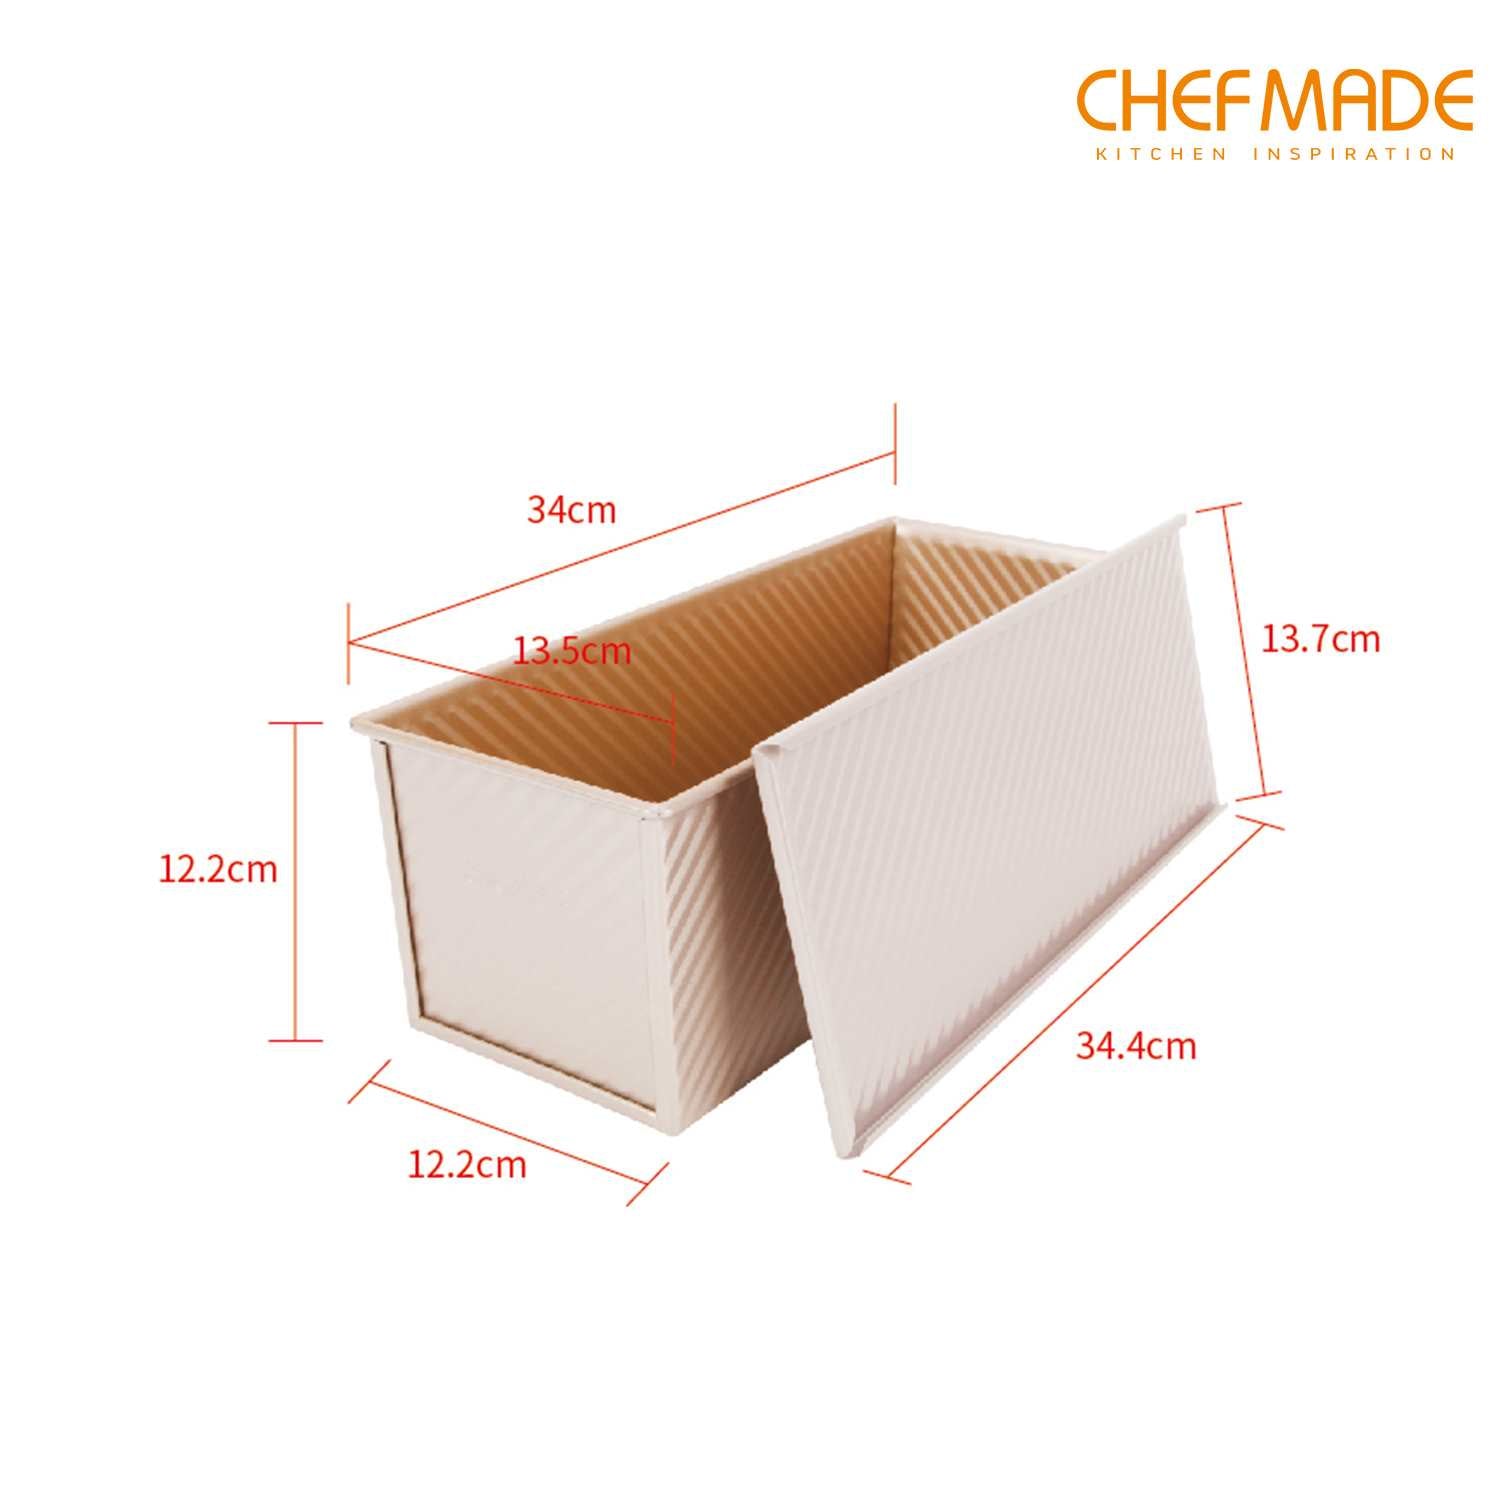 CHEFMADE 1000g Non-Stick Corrugated Loaf Pan with Cover (CM6005)